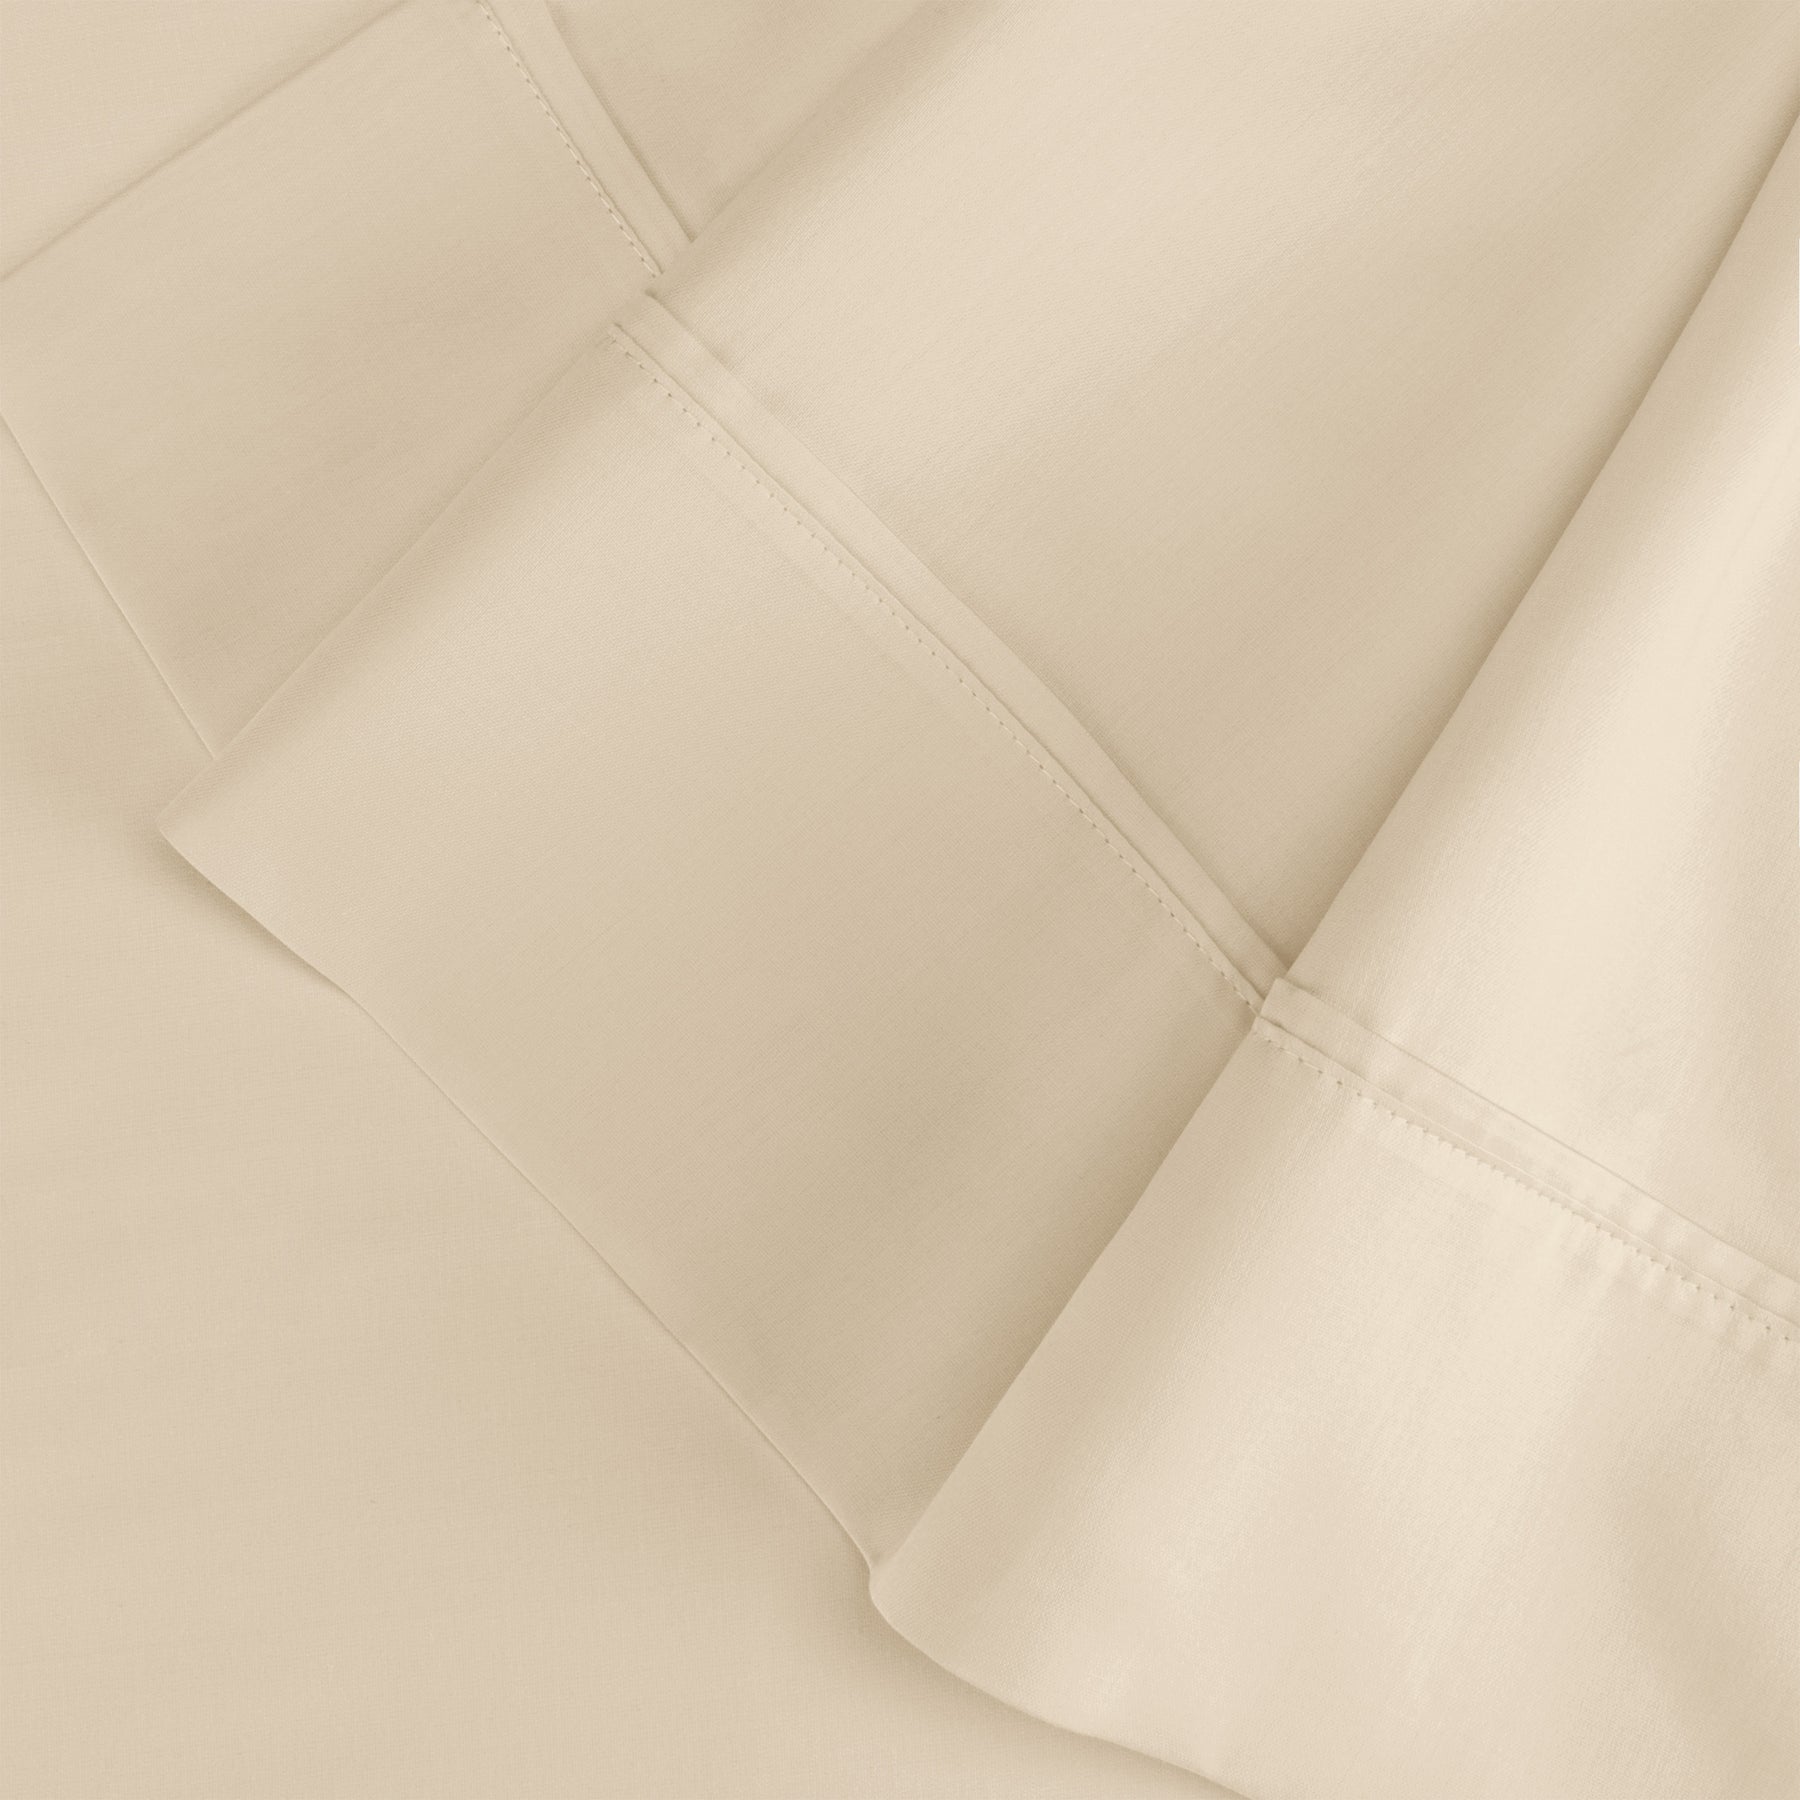 Superior Egyptian Cotton 300 Thread Count Solid Pillowcase Set - Ivory